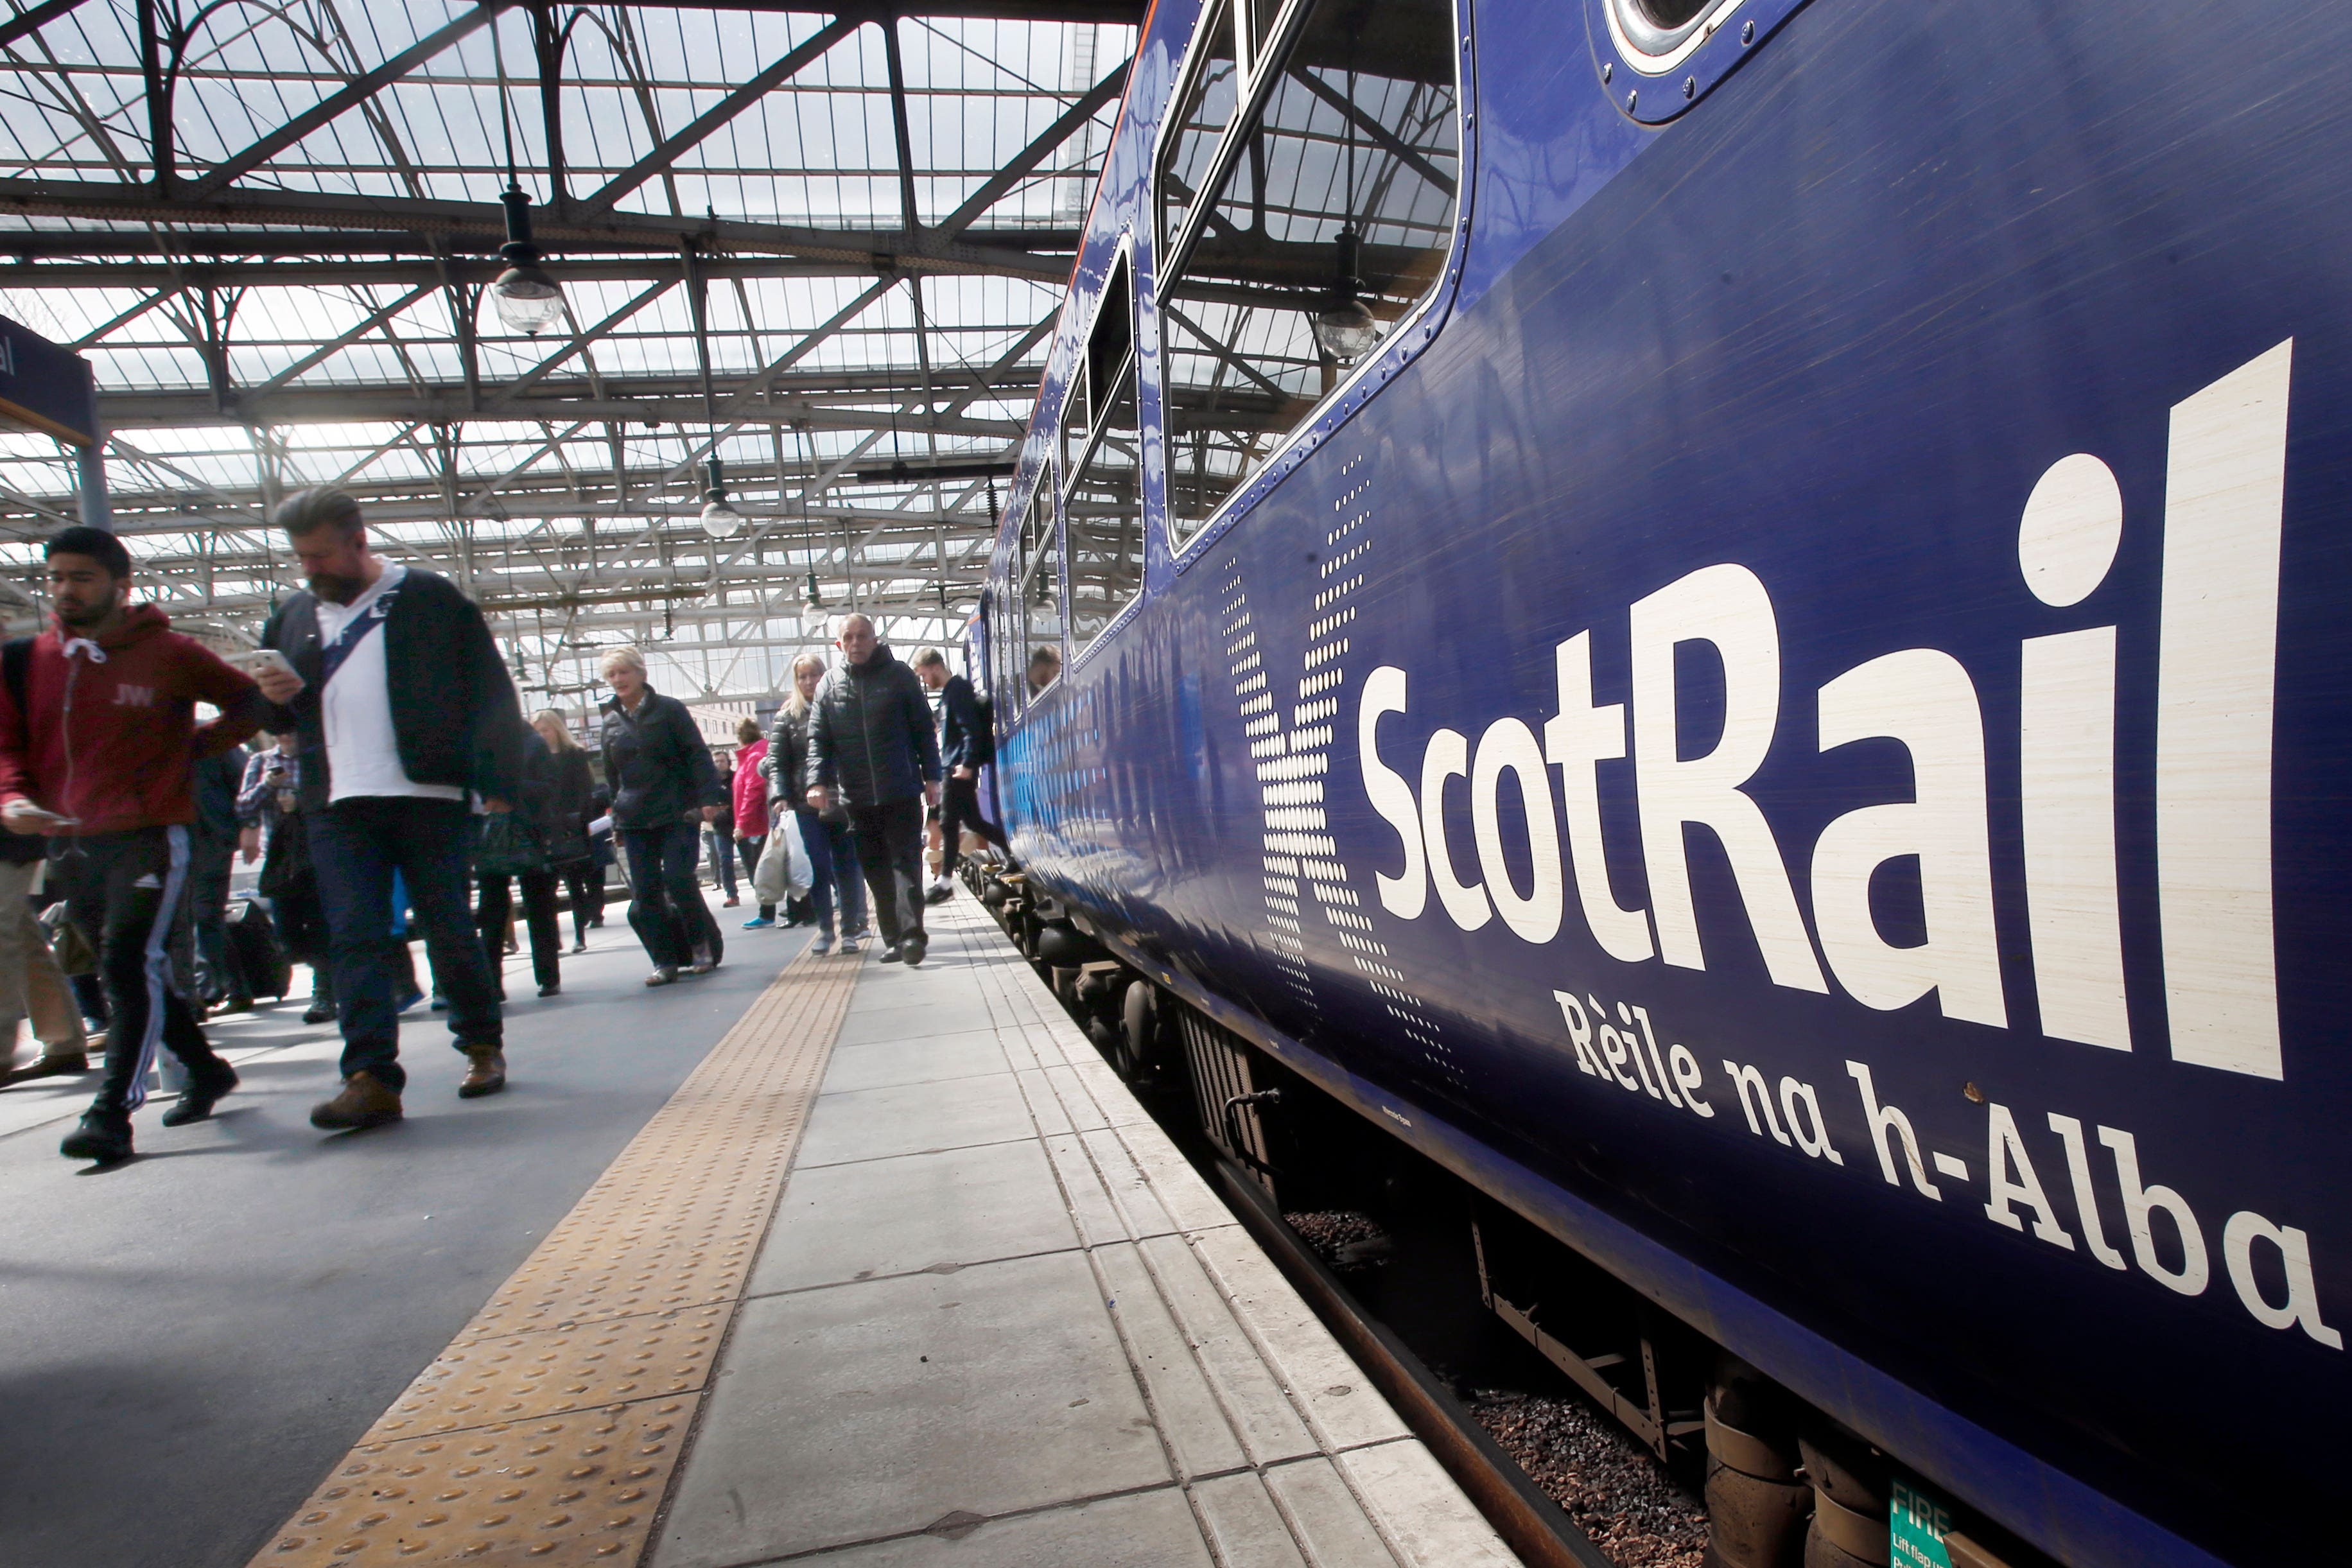 ScotRail is cancelling services due to Storm Isha (Danny Lawson/PA)